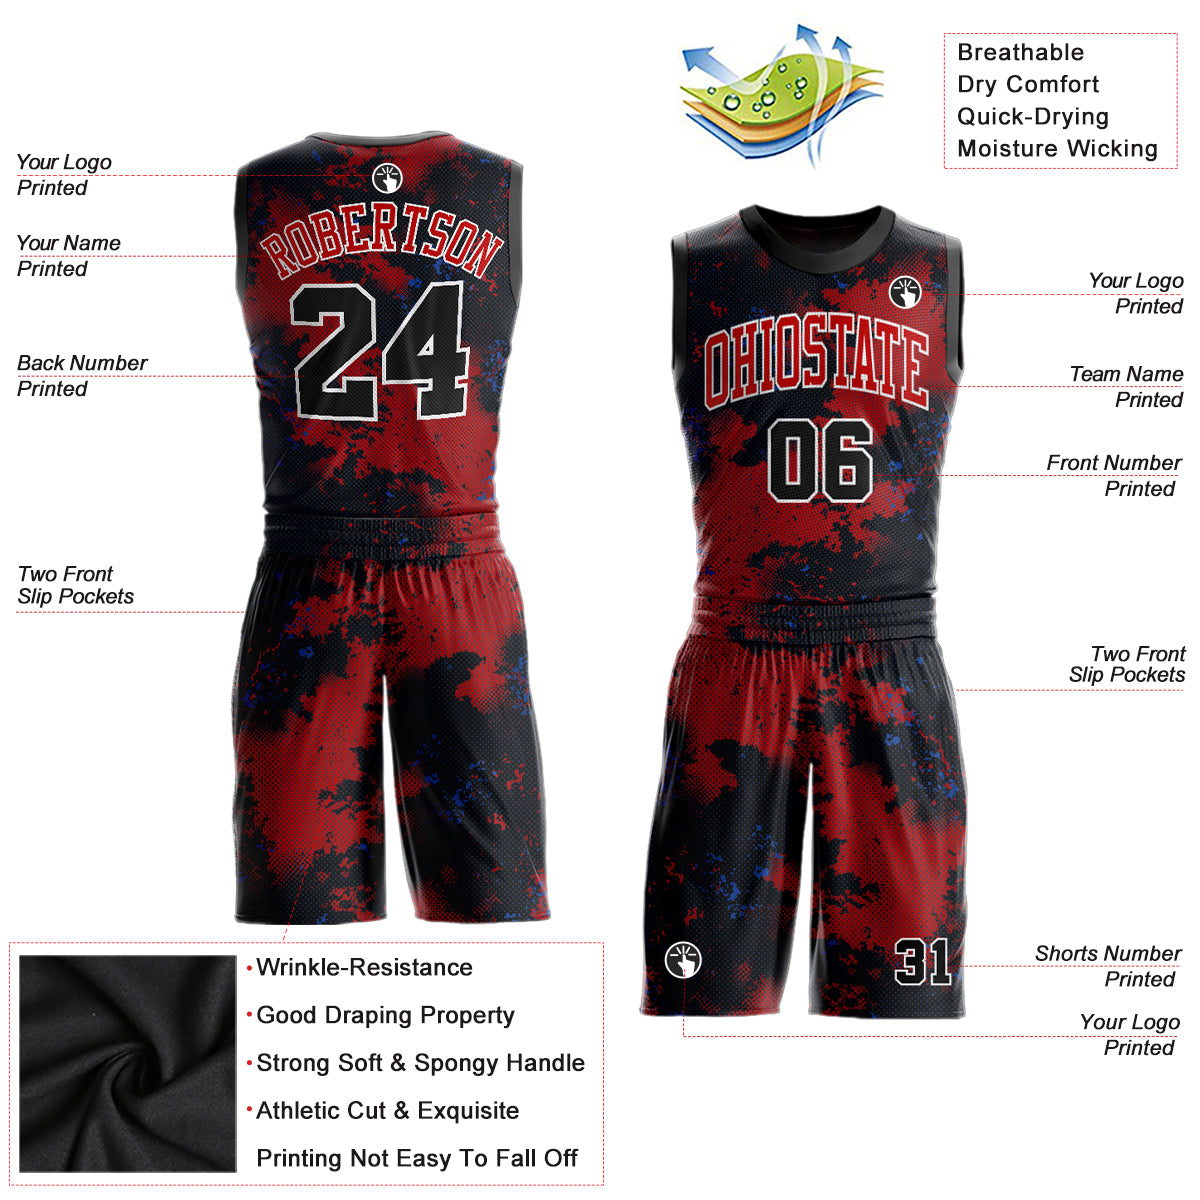 Custom Fashion Basketball Jersey Printed Personalized Name & Number Men's  Women's Kids Breathable Quick Dry 